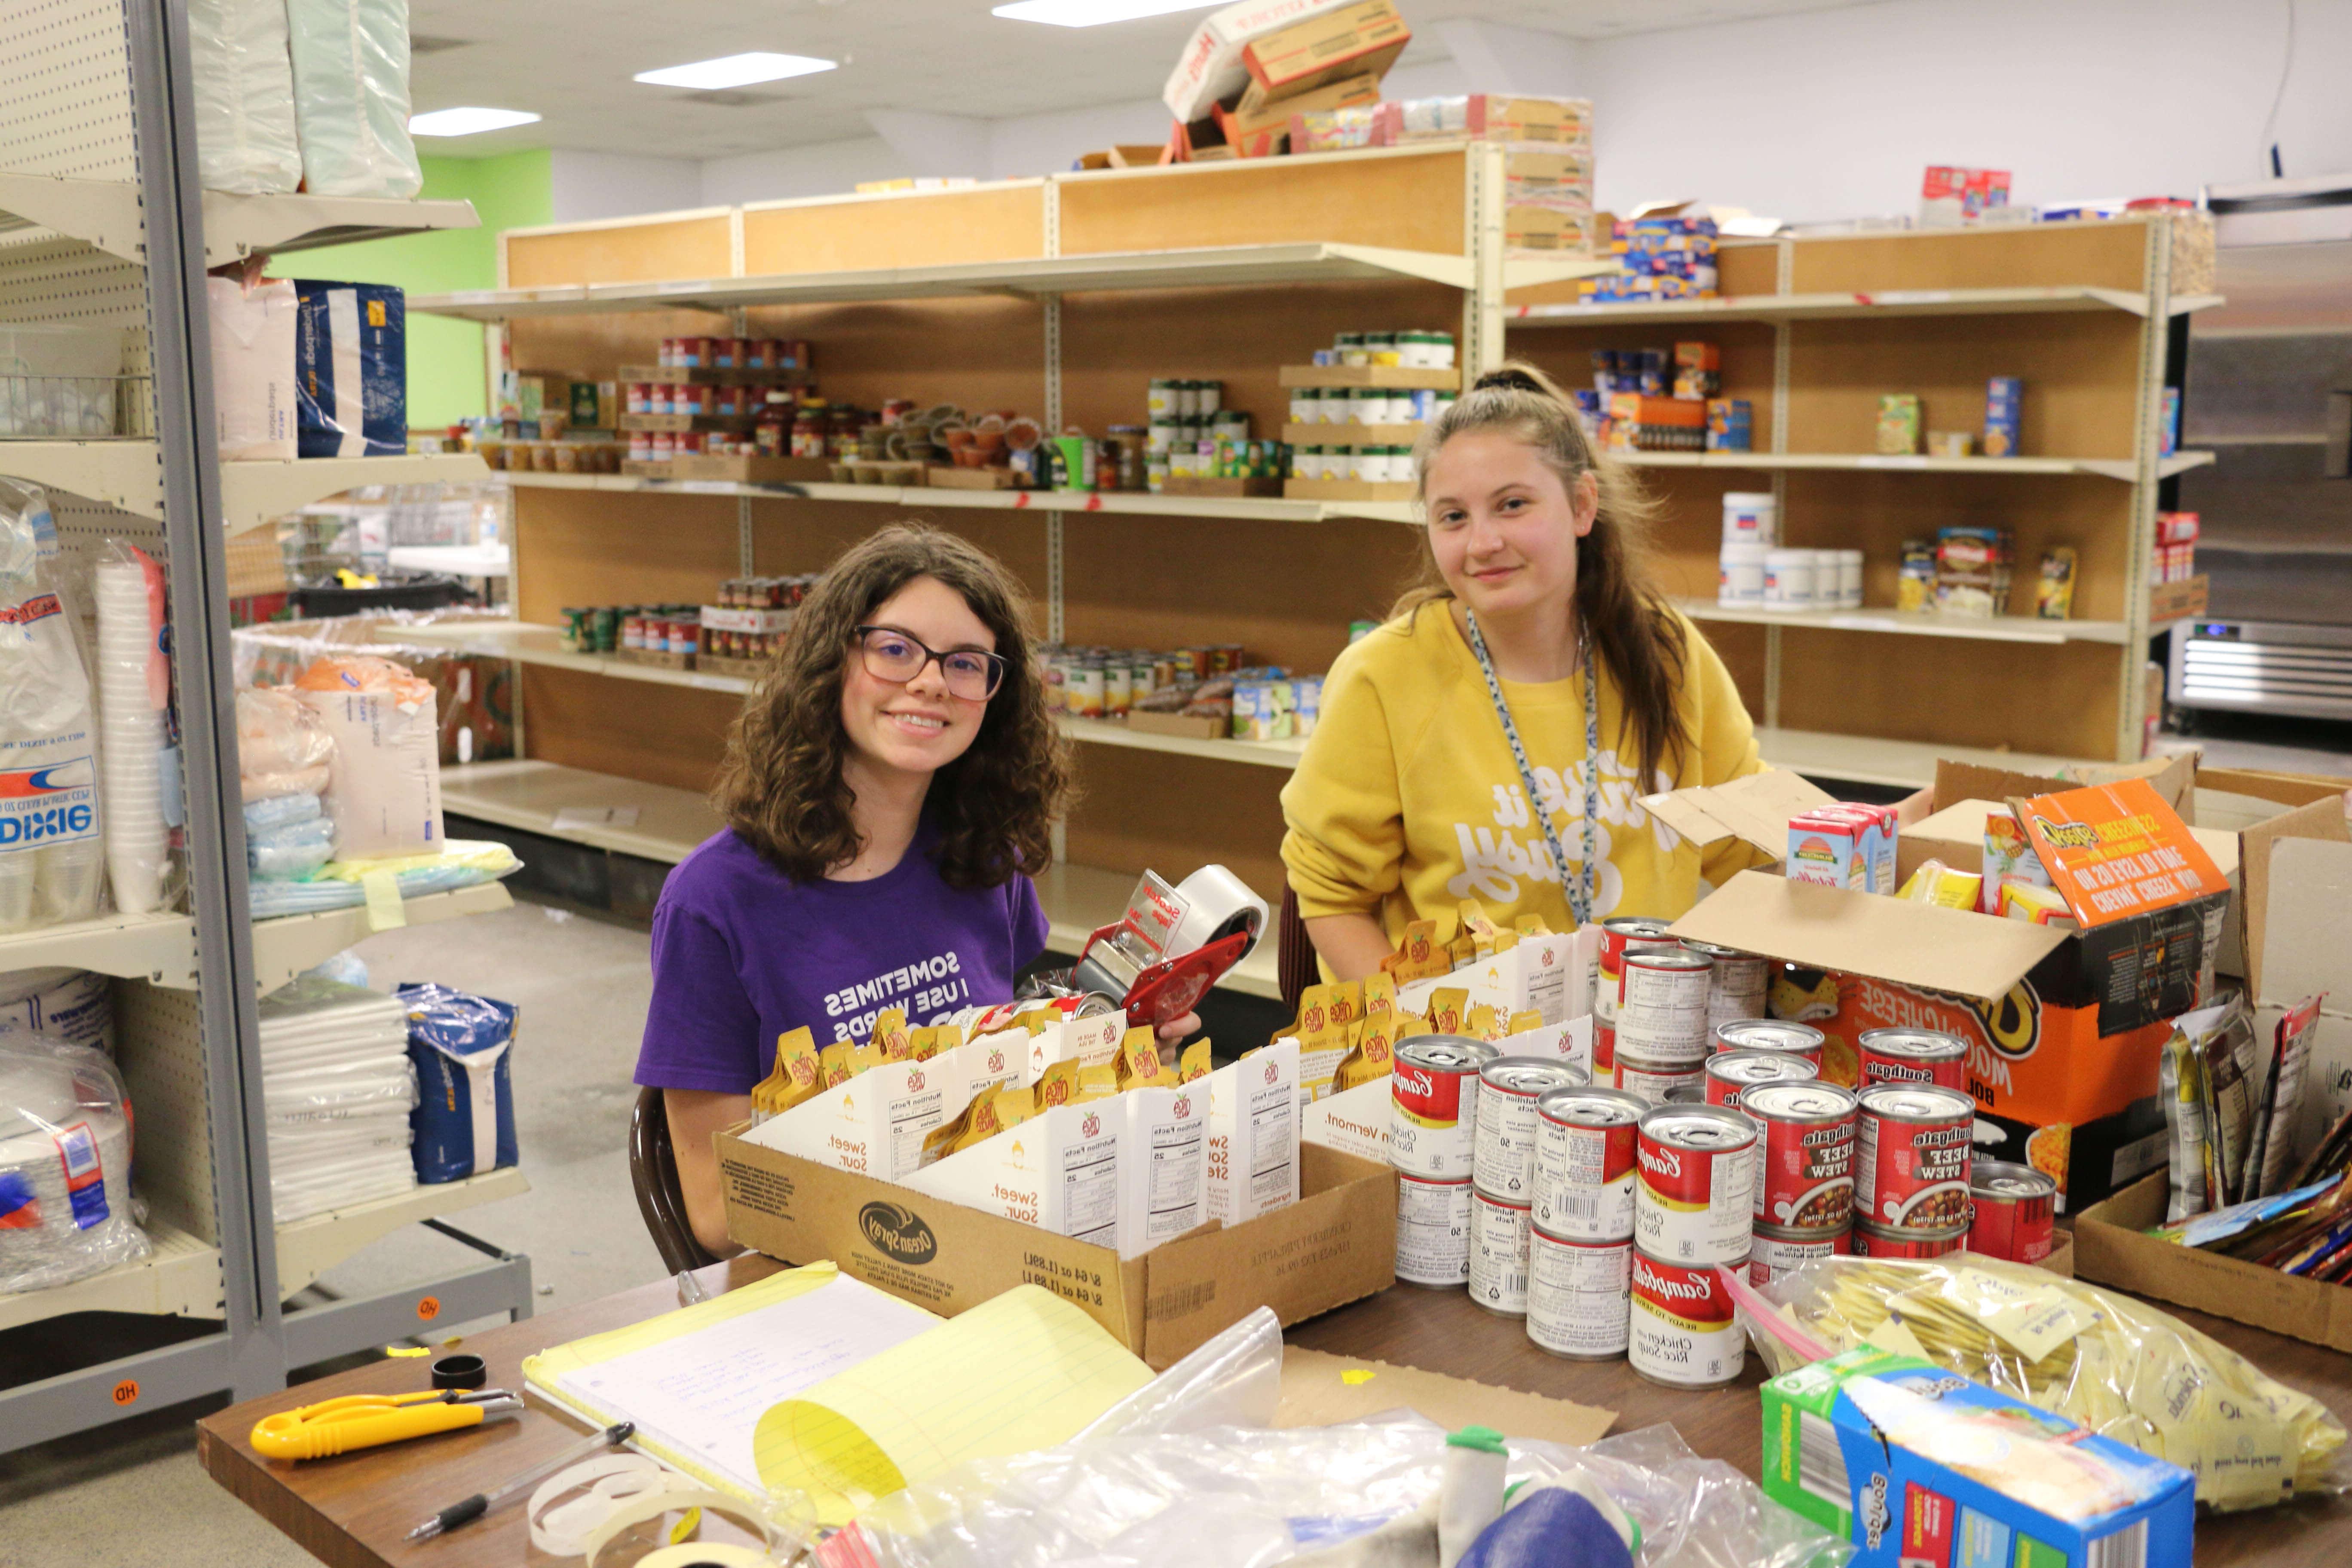 students serve by sorting canned food donations in food pantry